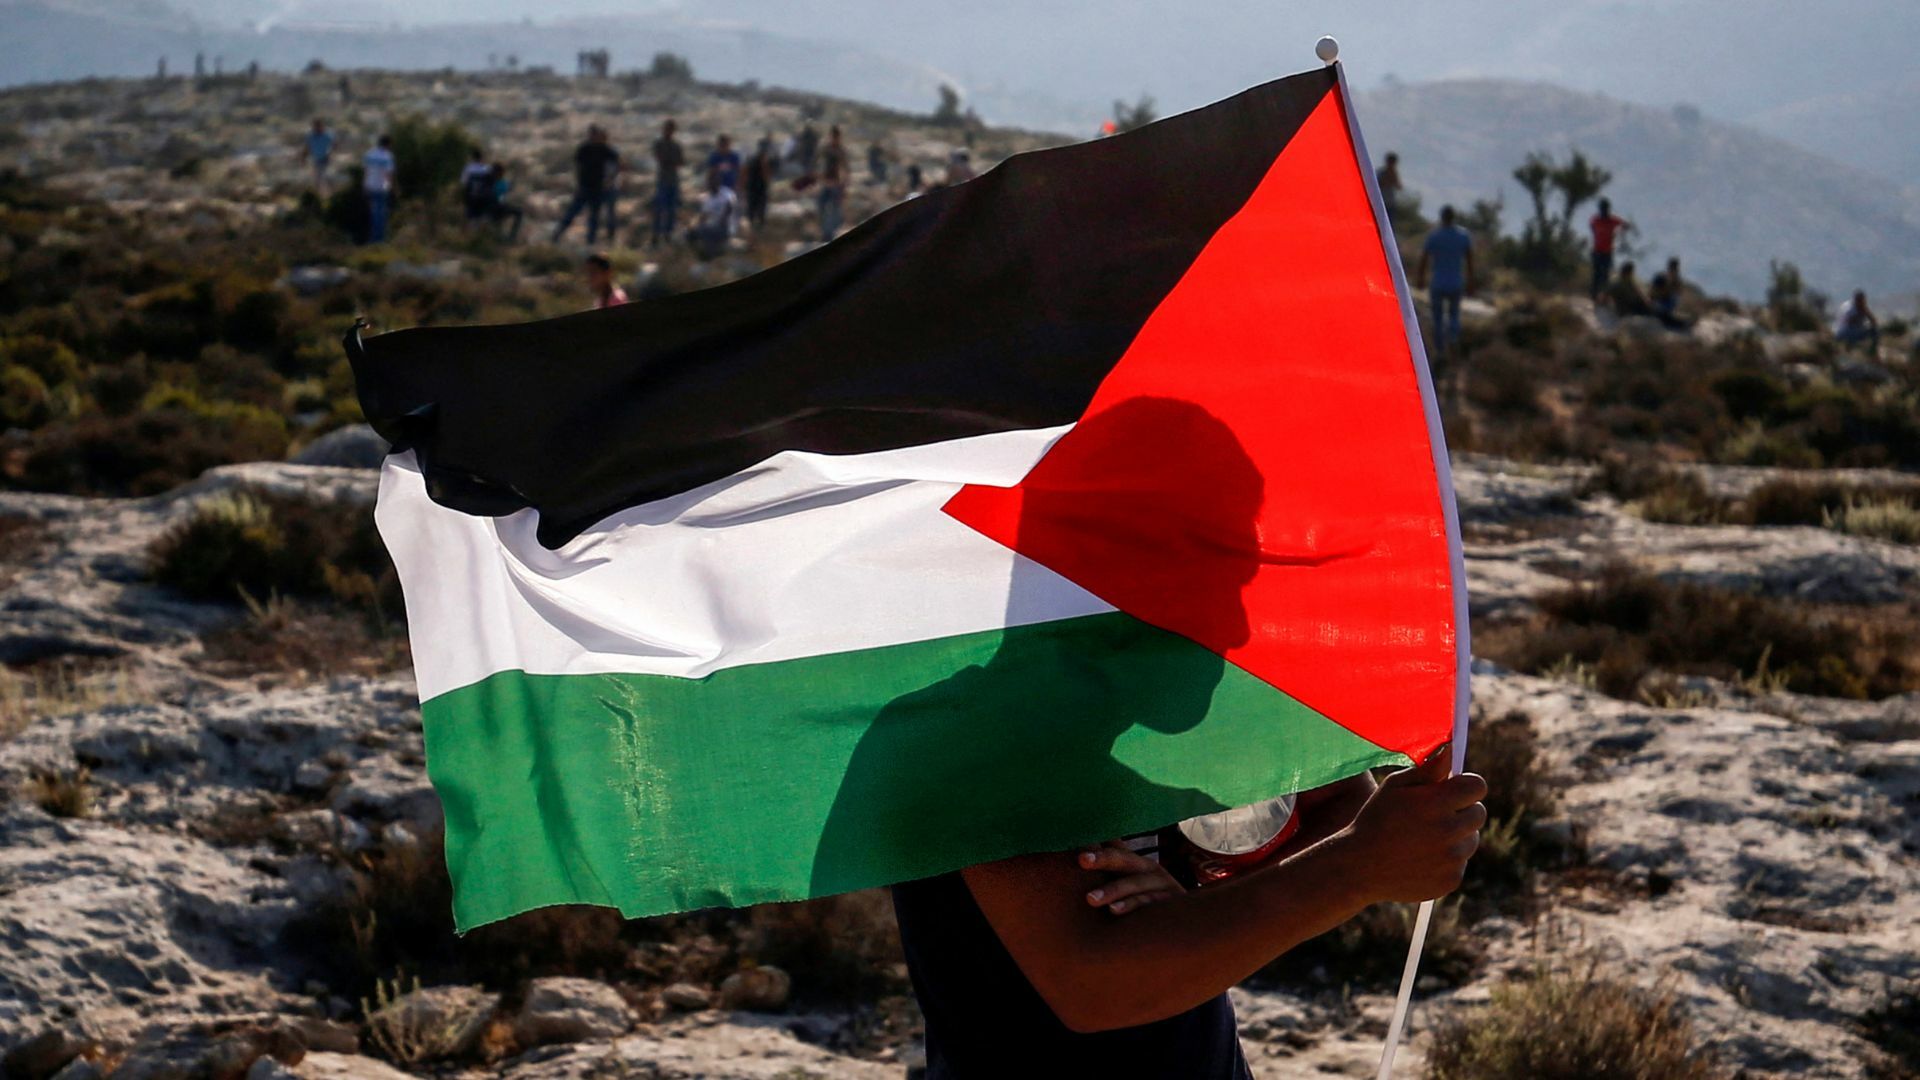 A Palestinian protester waves a Palestinian flag during a demonstration in the village of Ras Karkar west of Ramallah.